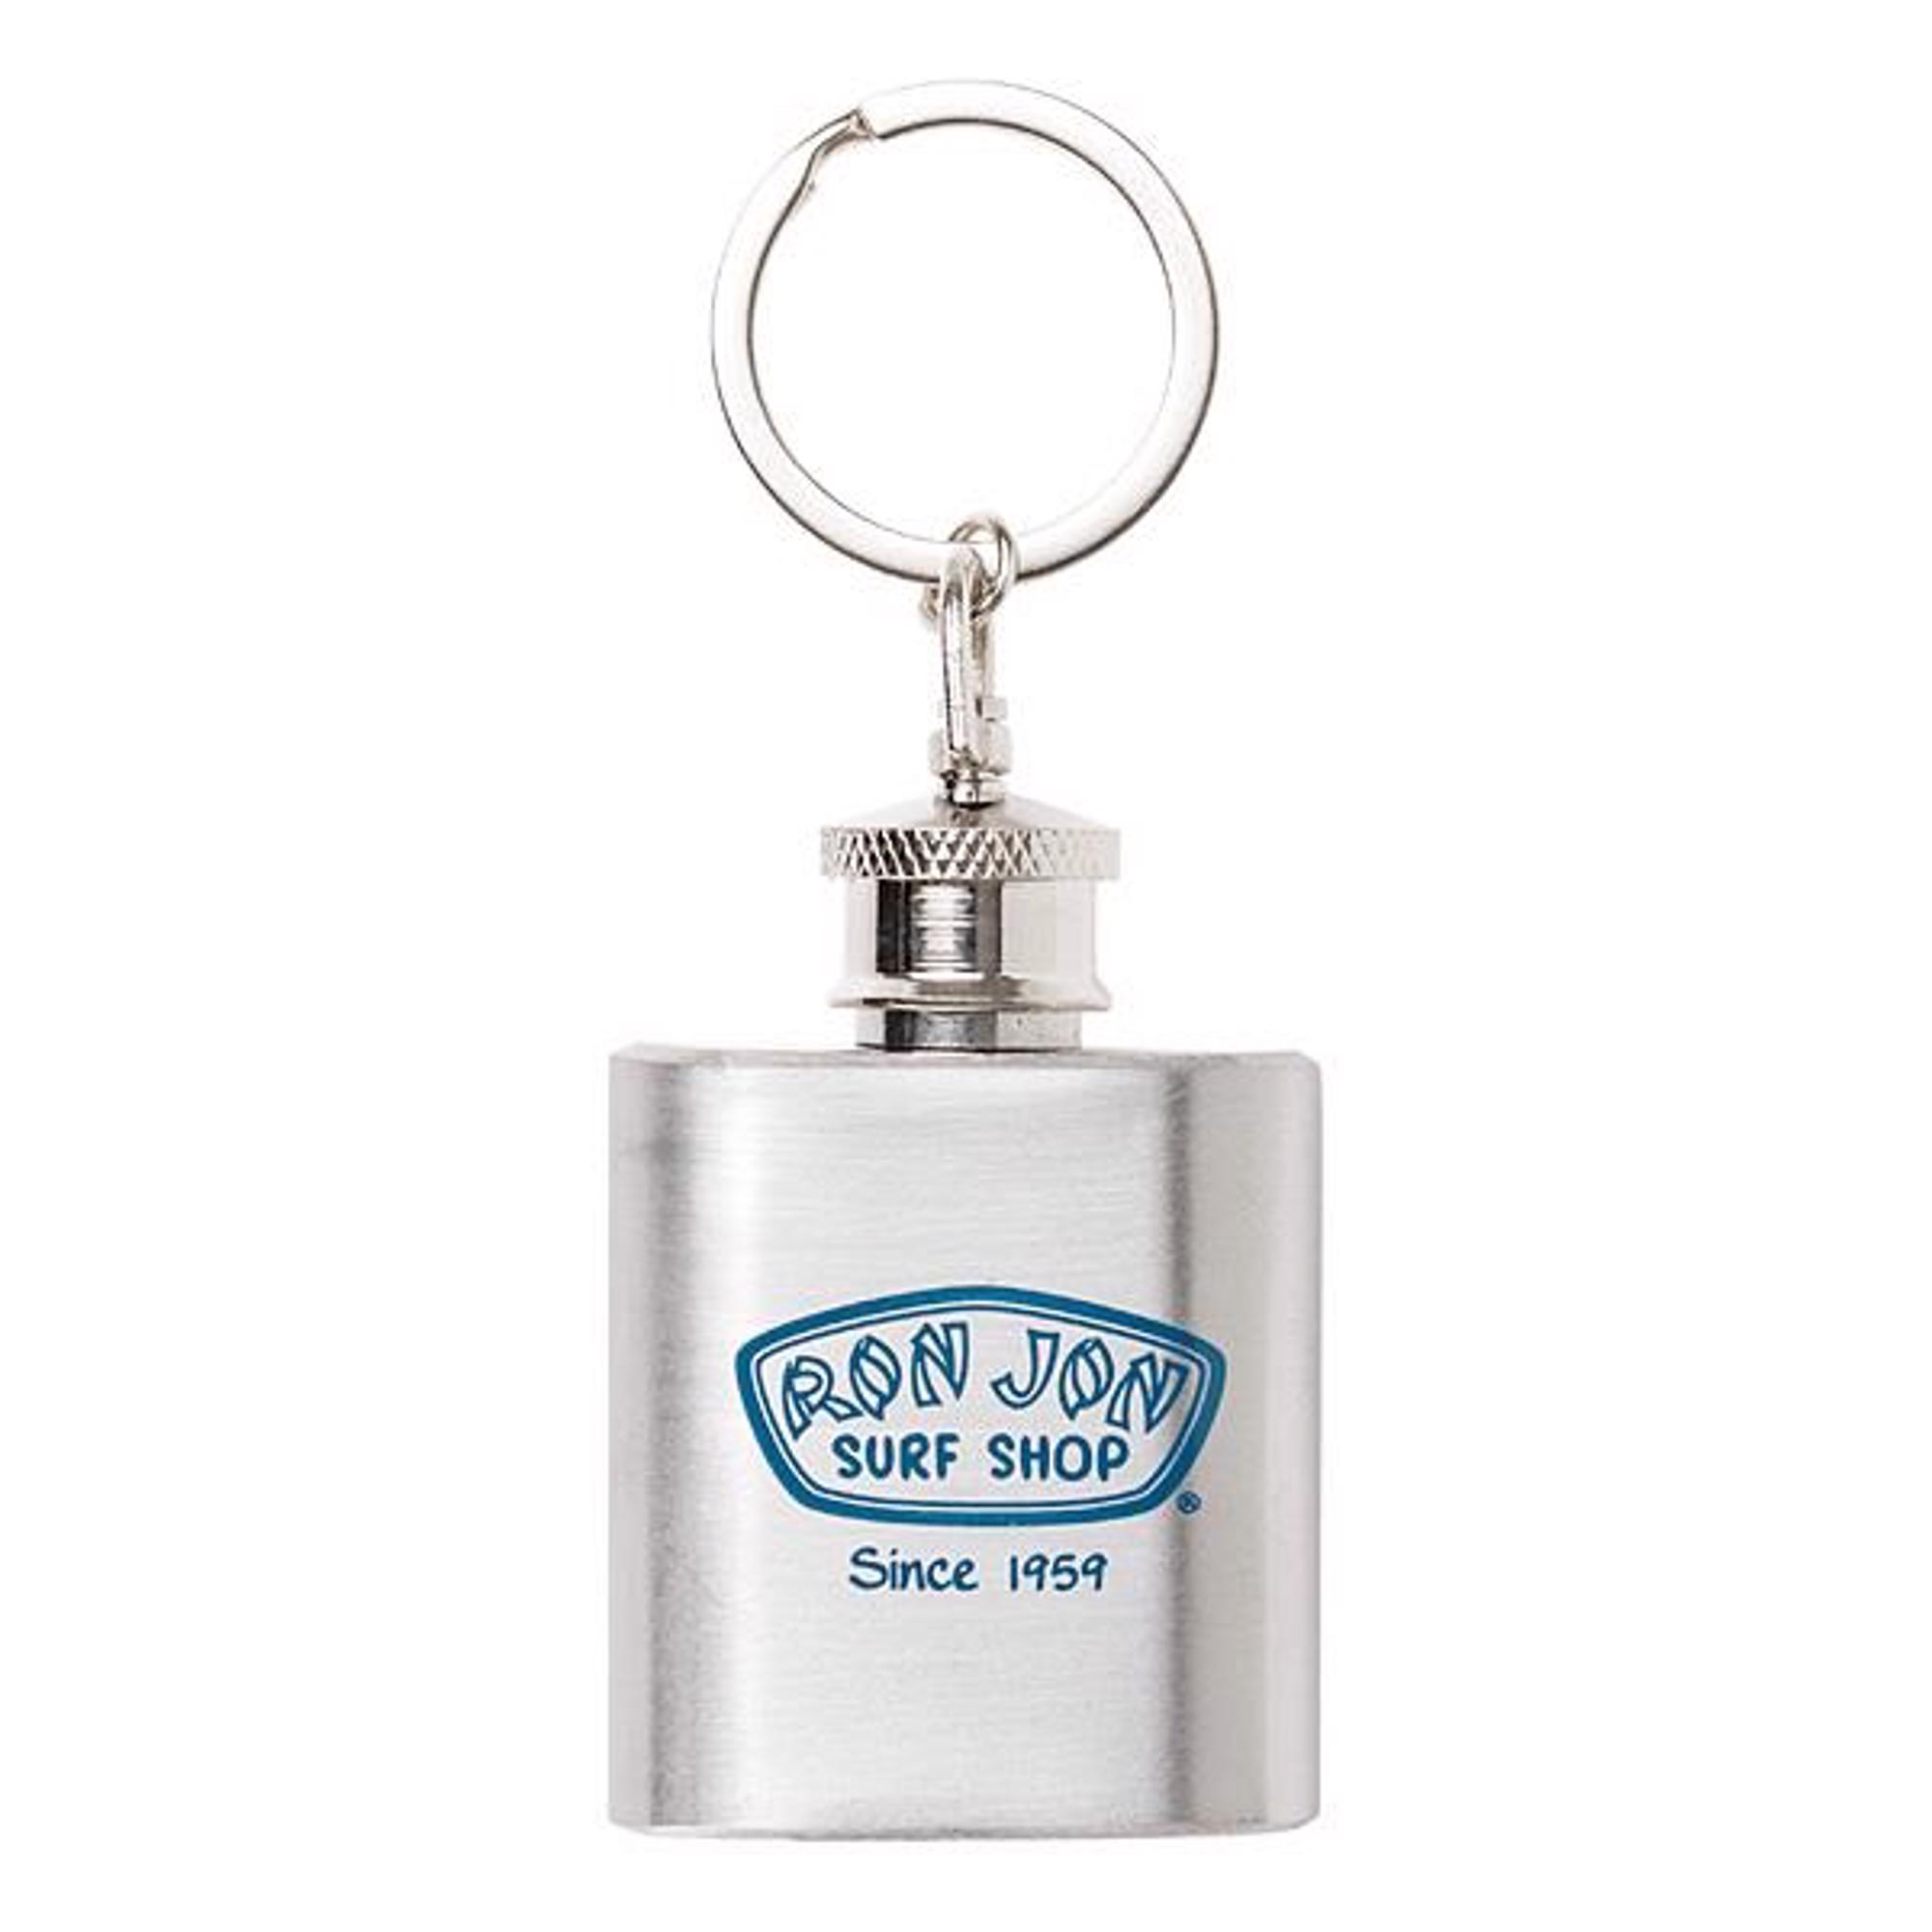 1 oz Mini Flask Keychain Screw Cap Small Drink Container Personalized Engraved 